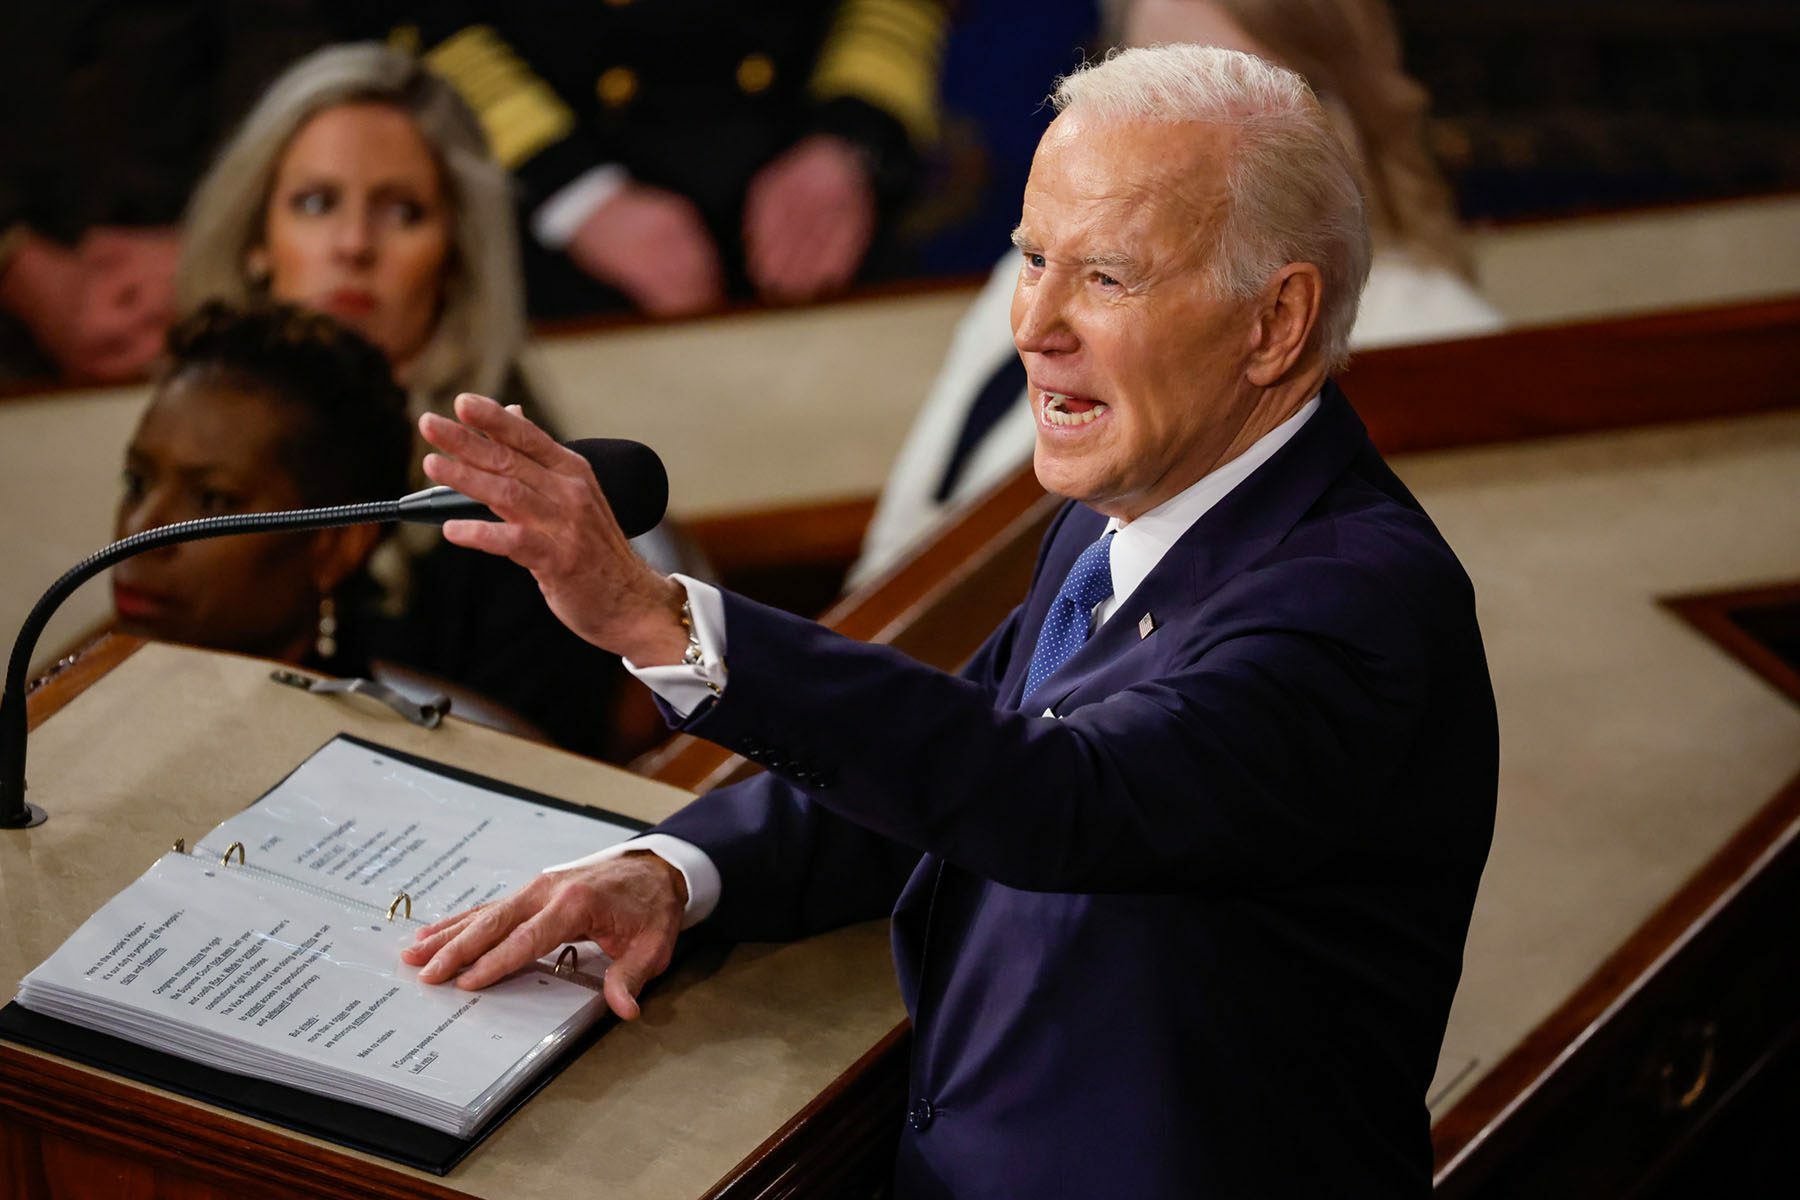 Joe Biden's speech notes are seen as he delivers the State of the Union address in the House Chamber of the Capitol.